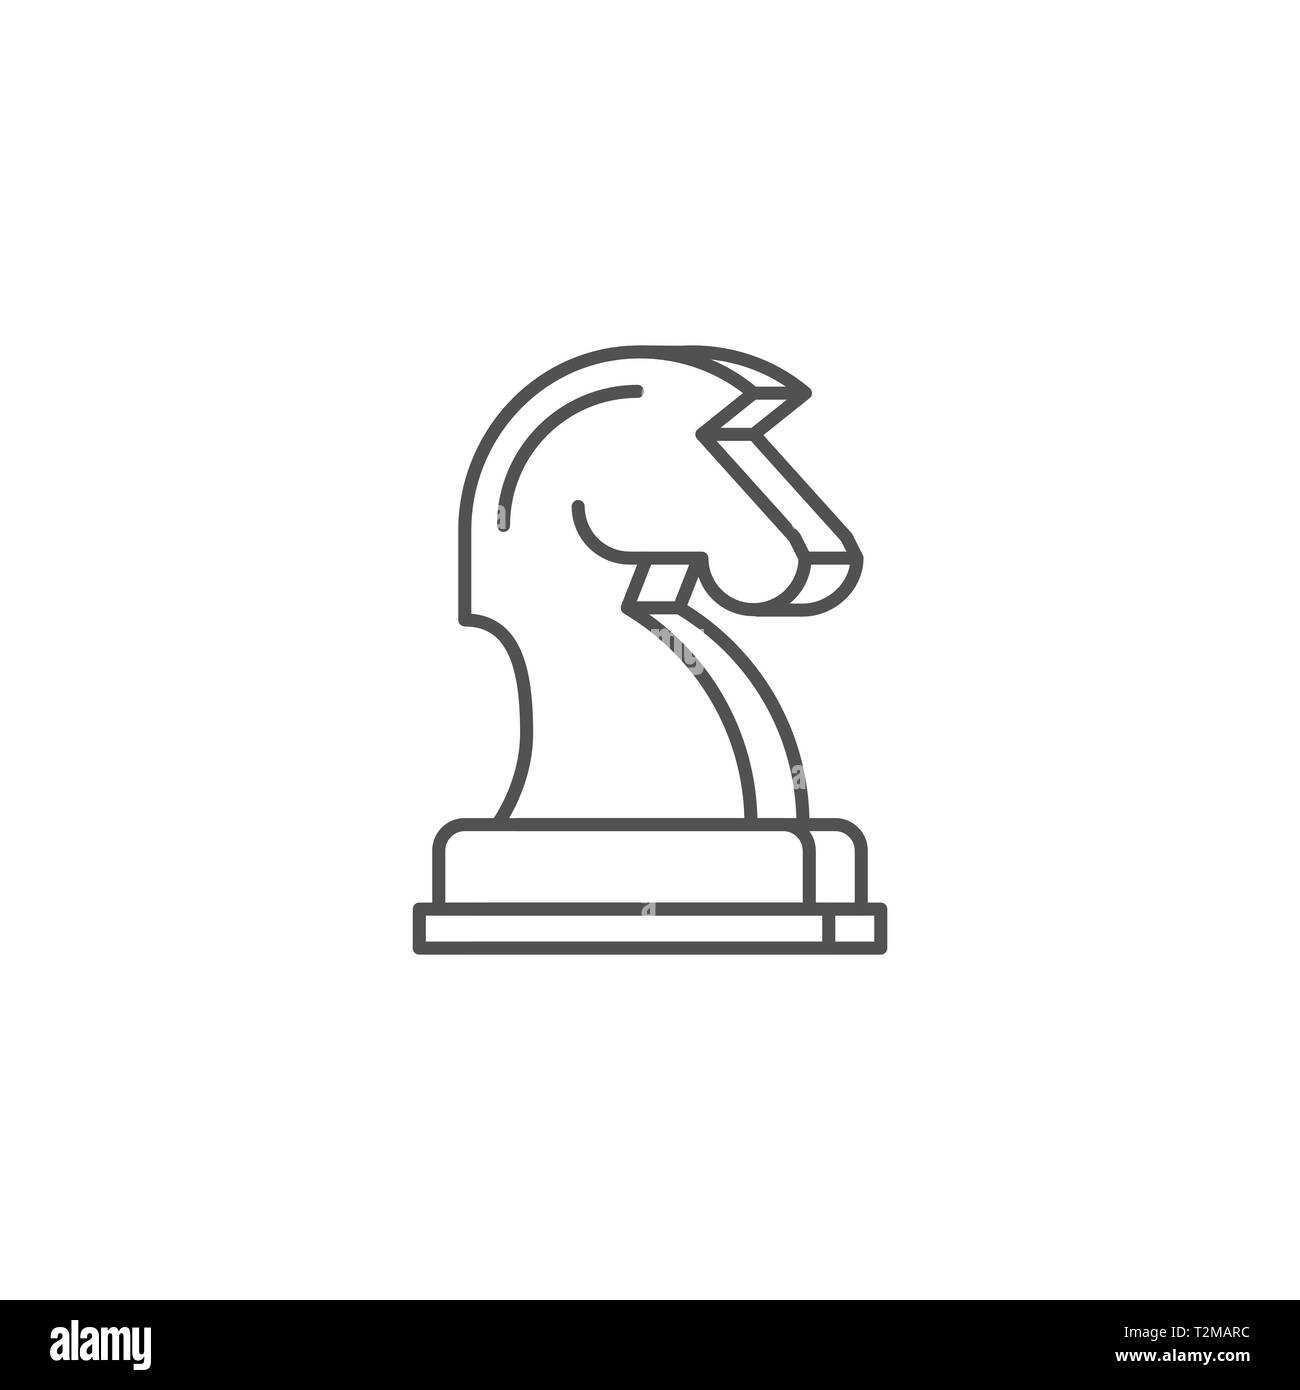 Horse Chess Icon. Horse Chess Related Vector Line Icon. Isolated on White Background. Editable Stroke. Stock Vector